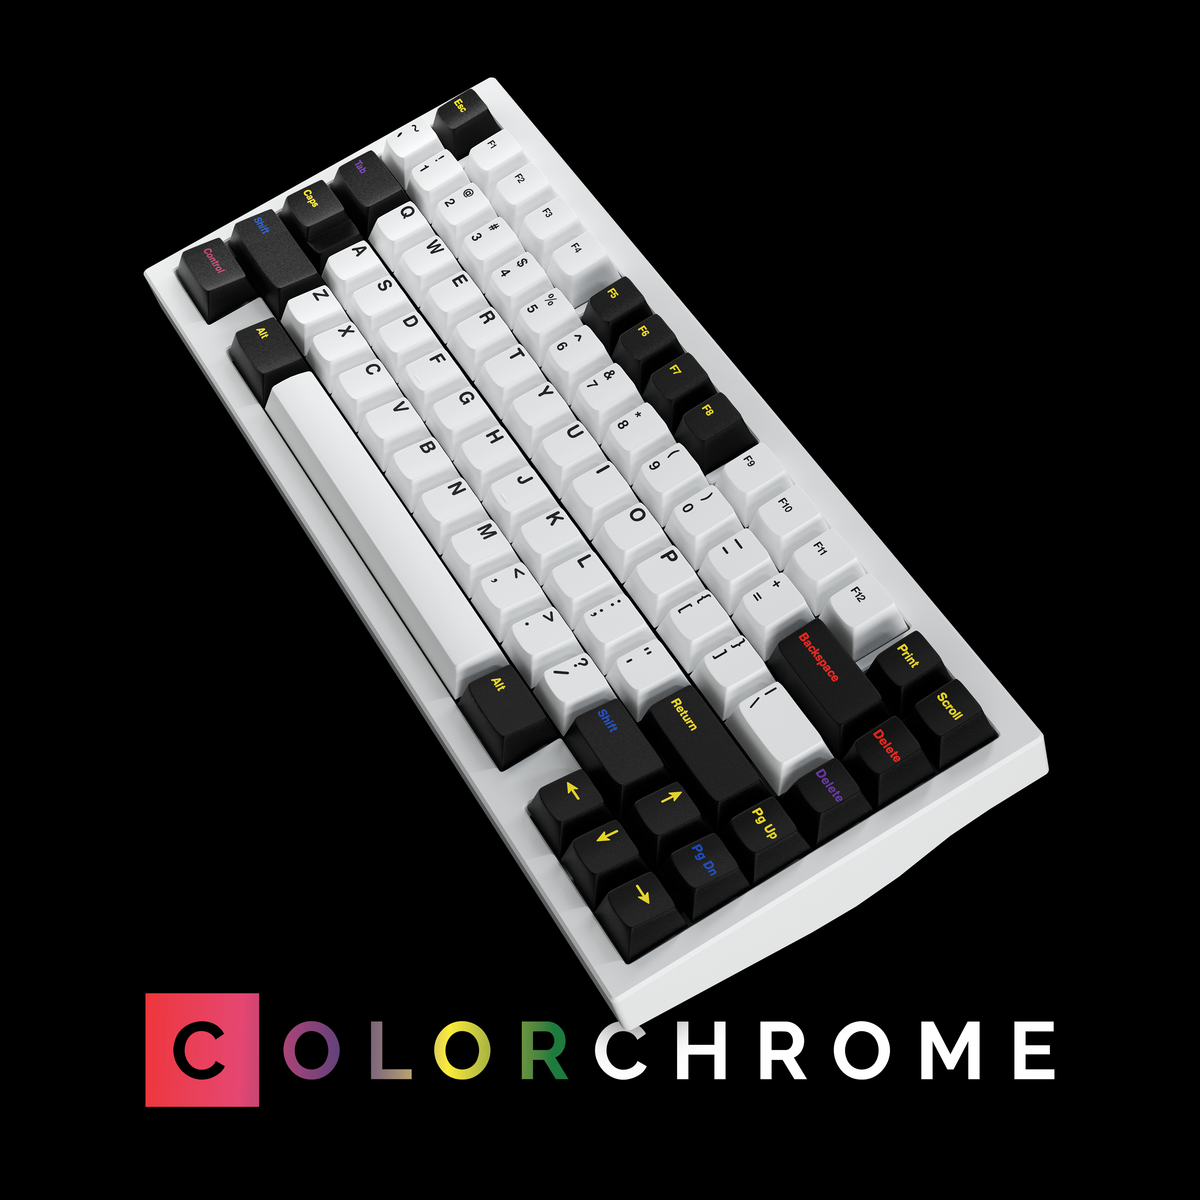  GMK CYL Colorchrome on white keyboard angled with colorchrome written below 